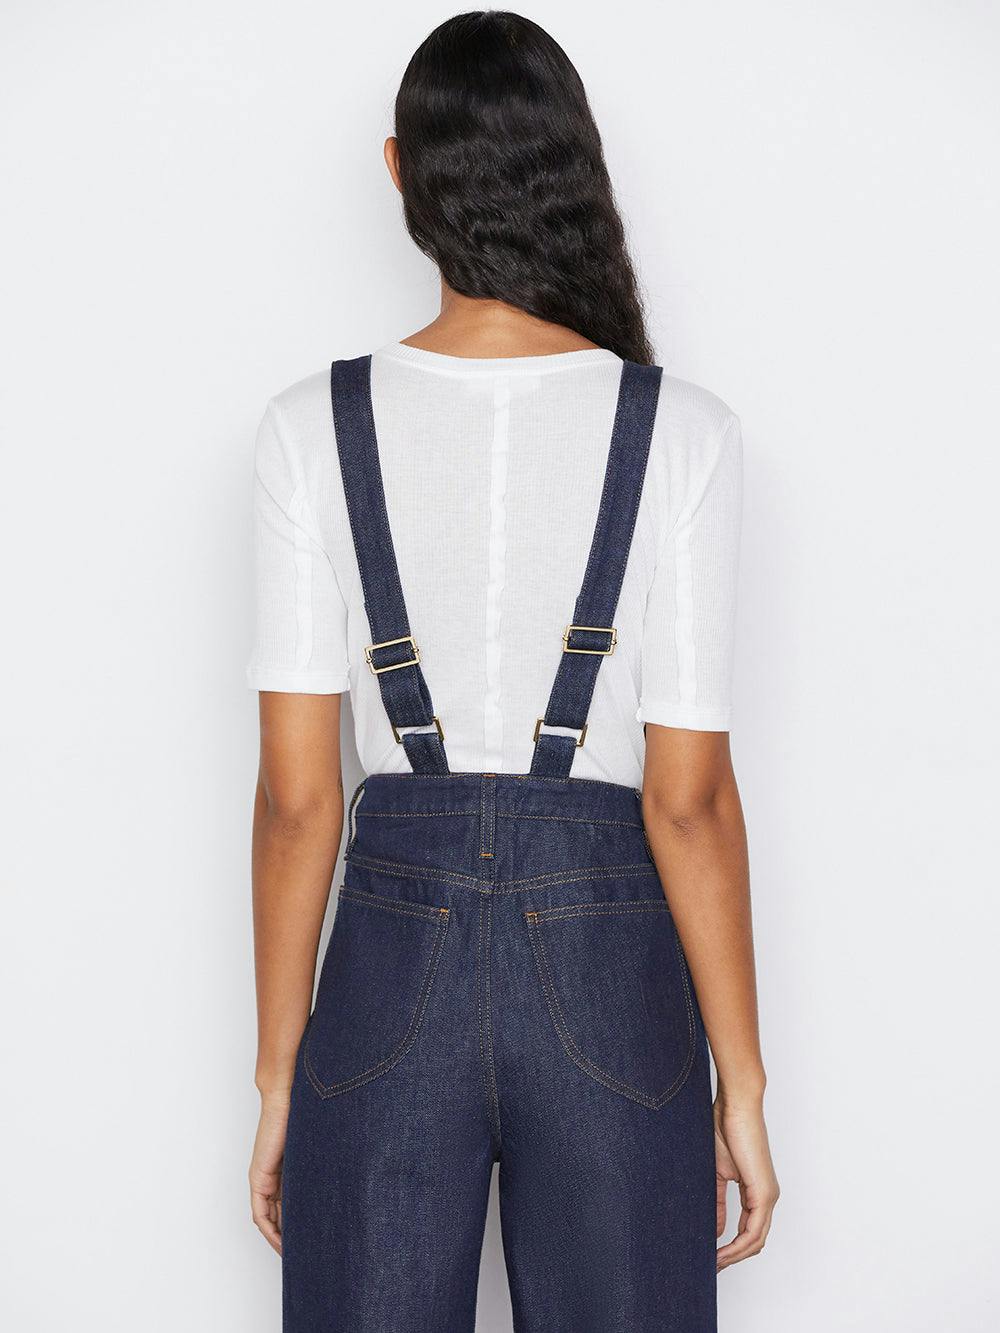 overalls back detail view